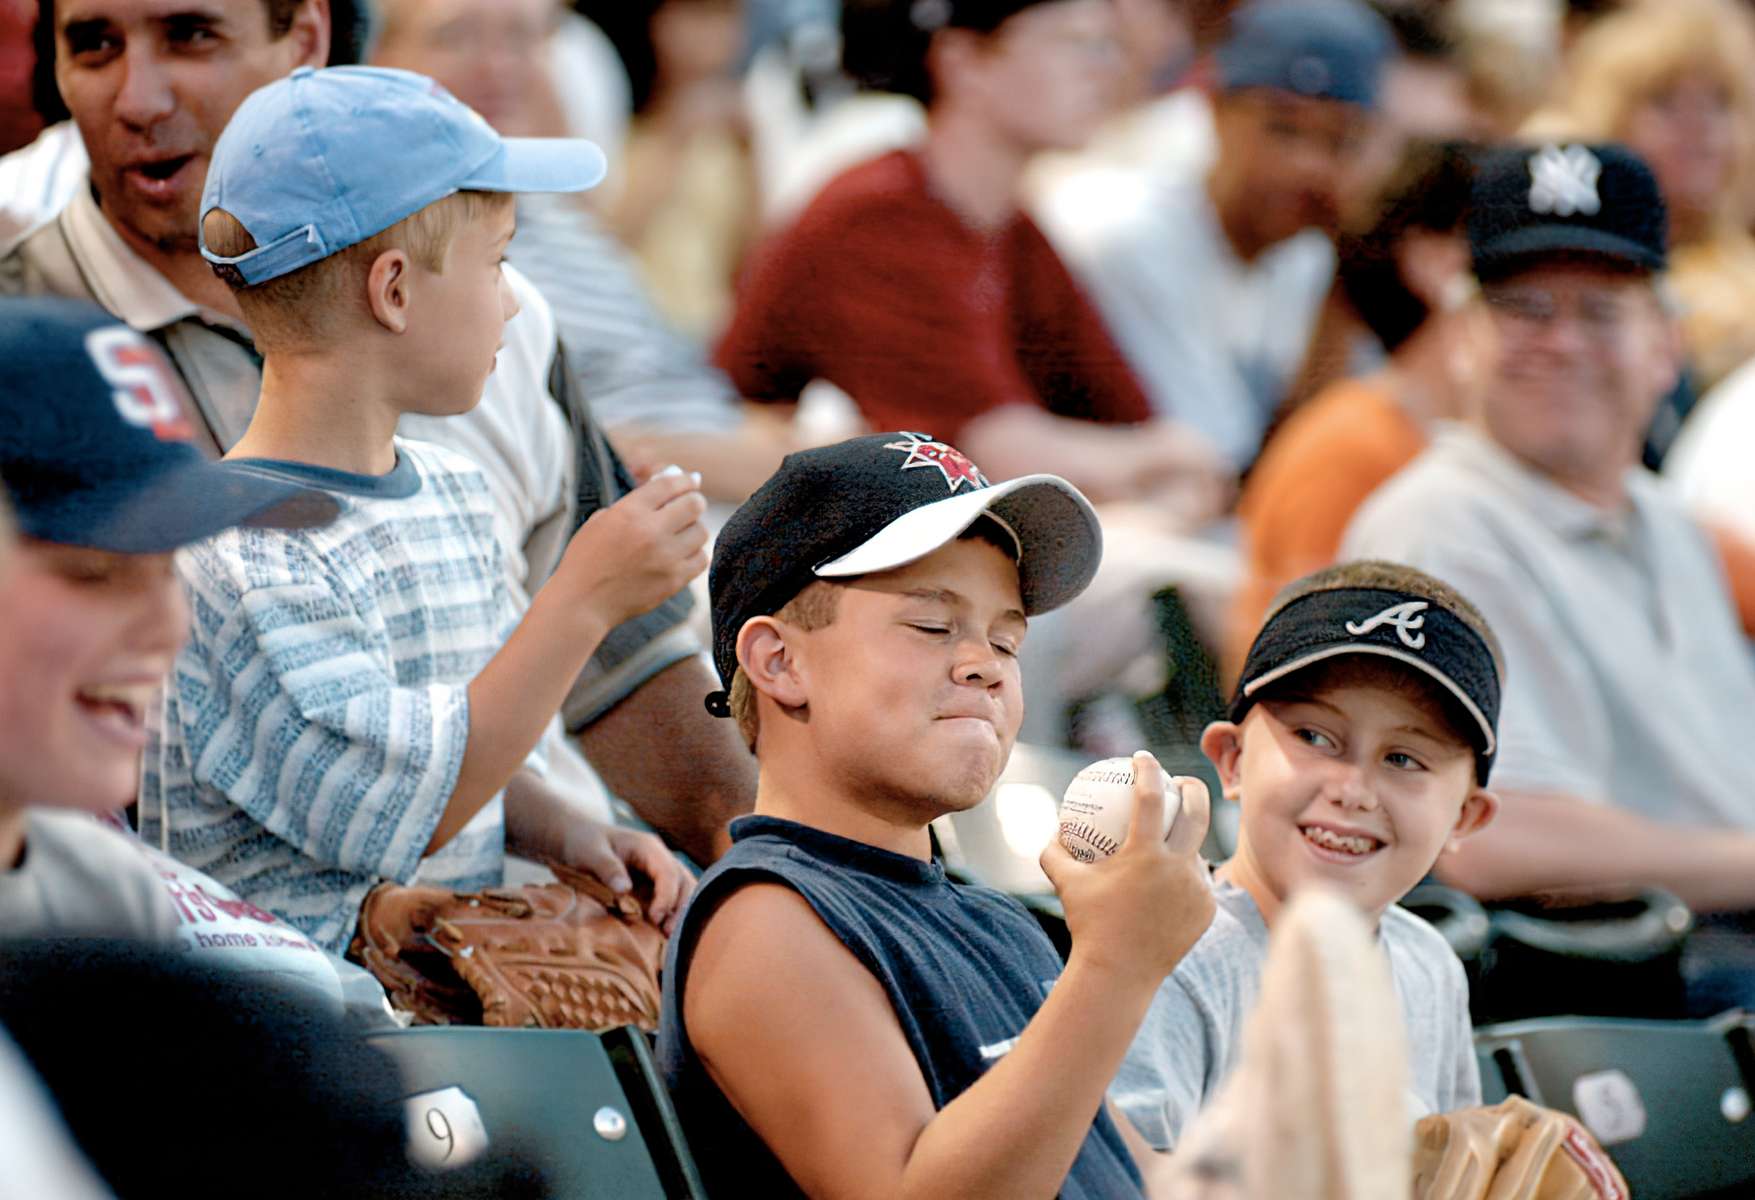 Raymond Stallings (left), age 8, and his friend Mitchell Barnhill, age 9, (right) admire a baseball he caught over the first base line at Victory Field during a game between the Indianapolis Indians and the Norfolk Tides.   (staff photo/Karen Ducey. #60115. 6/25/01)